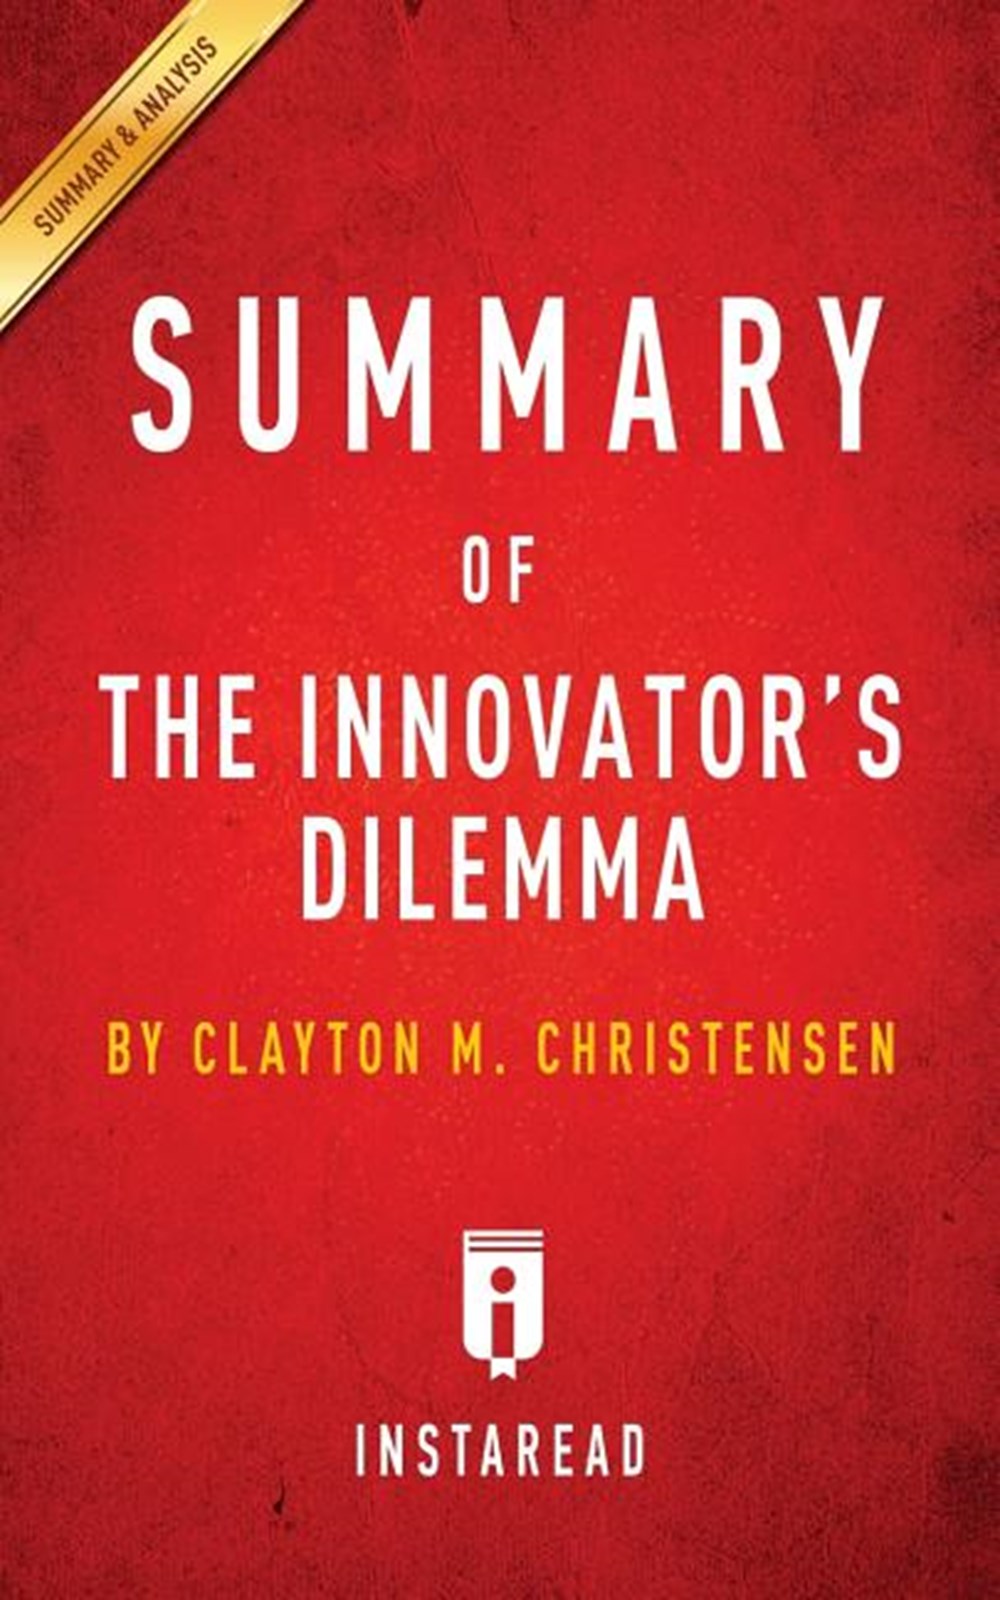 Summary of The Innovator's Dilemma by Clayton M. Christensen - Includes Analysis